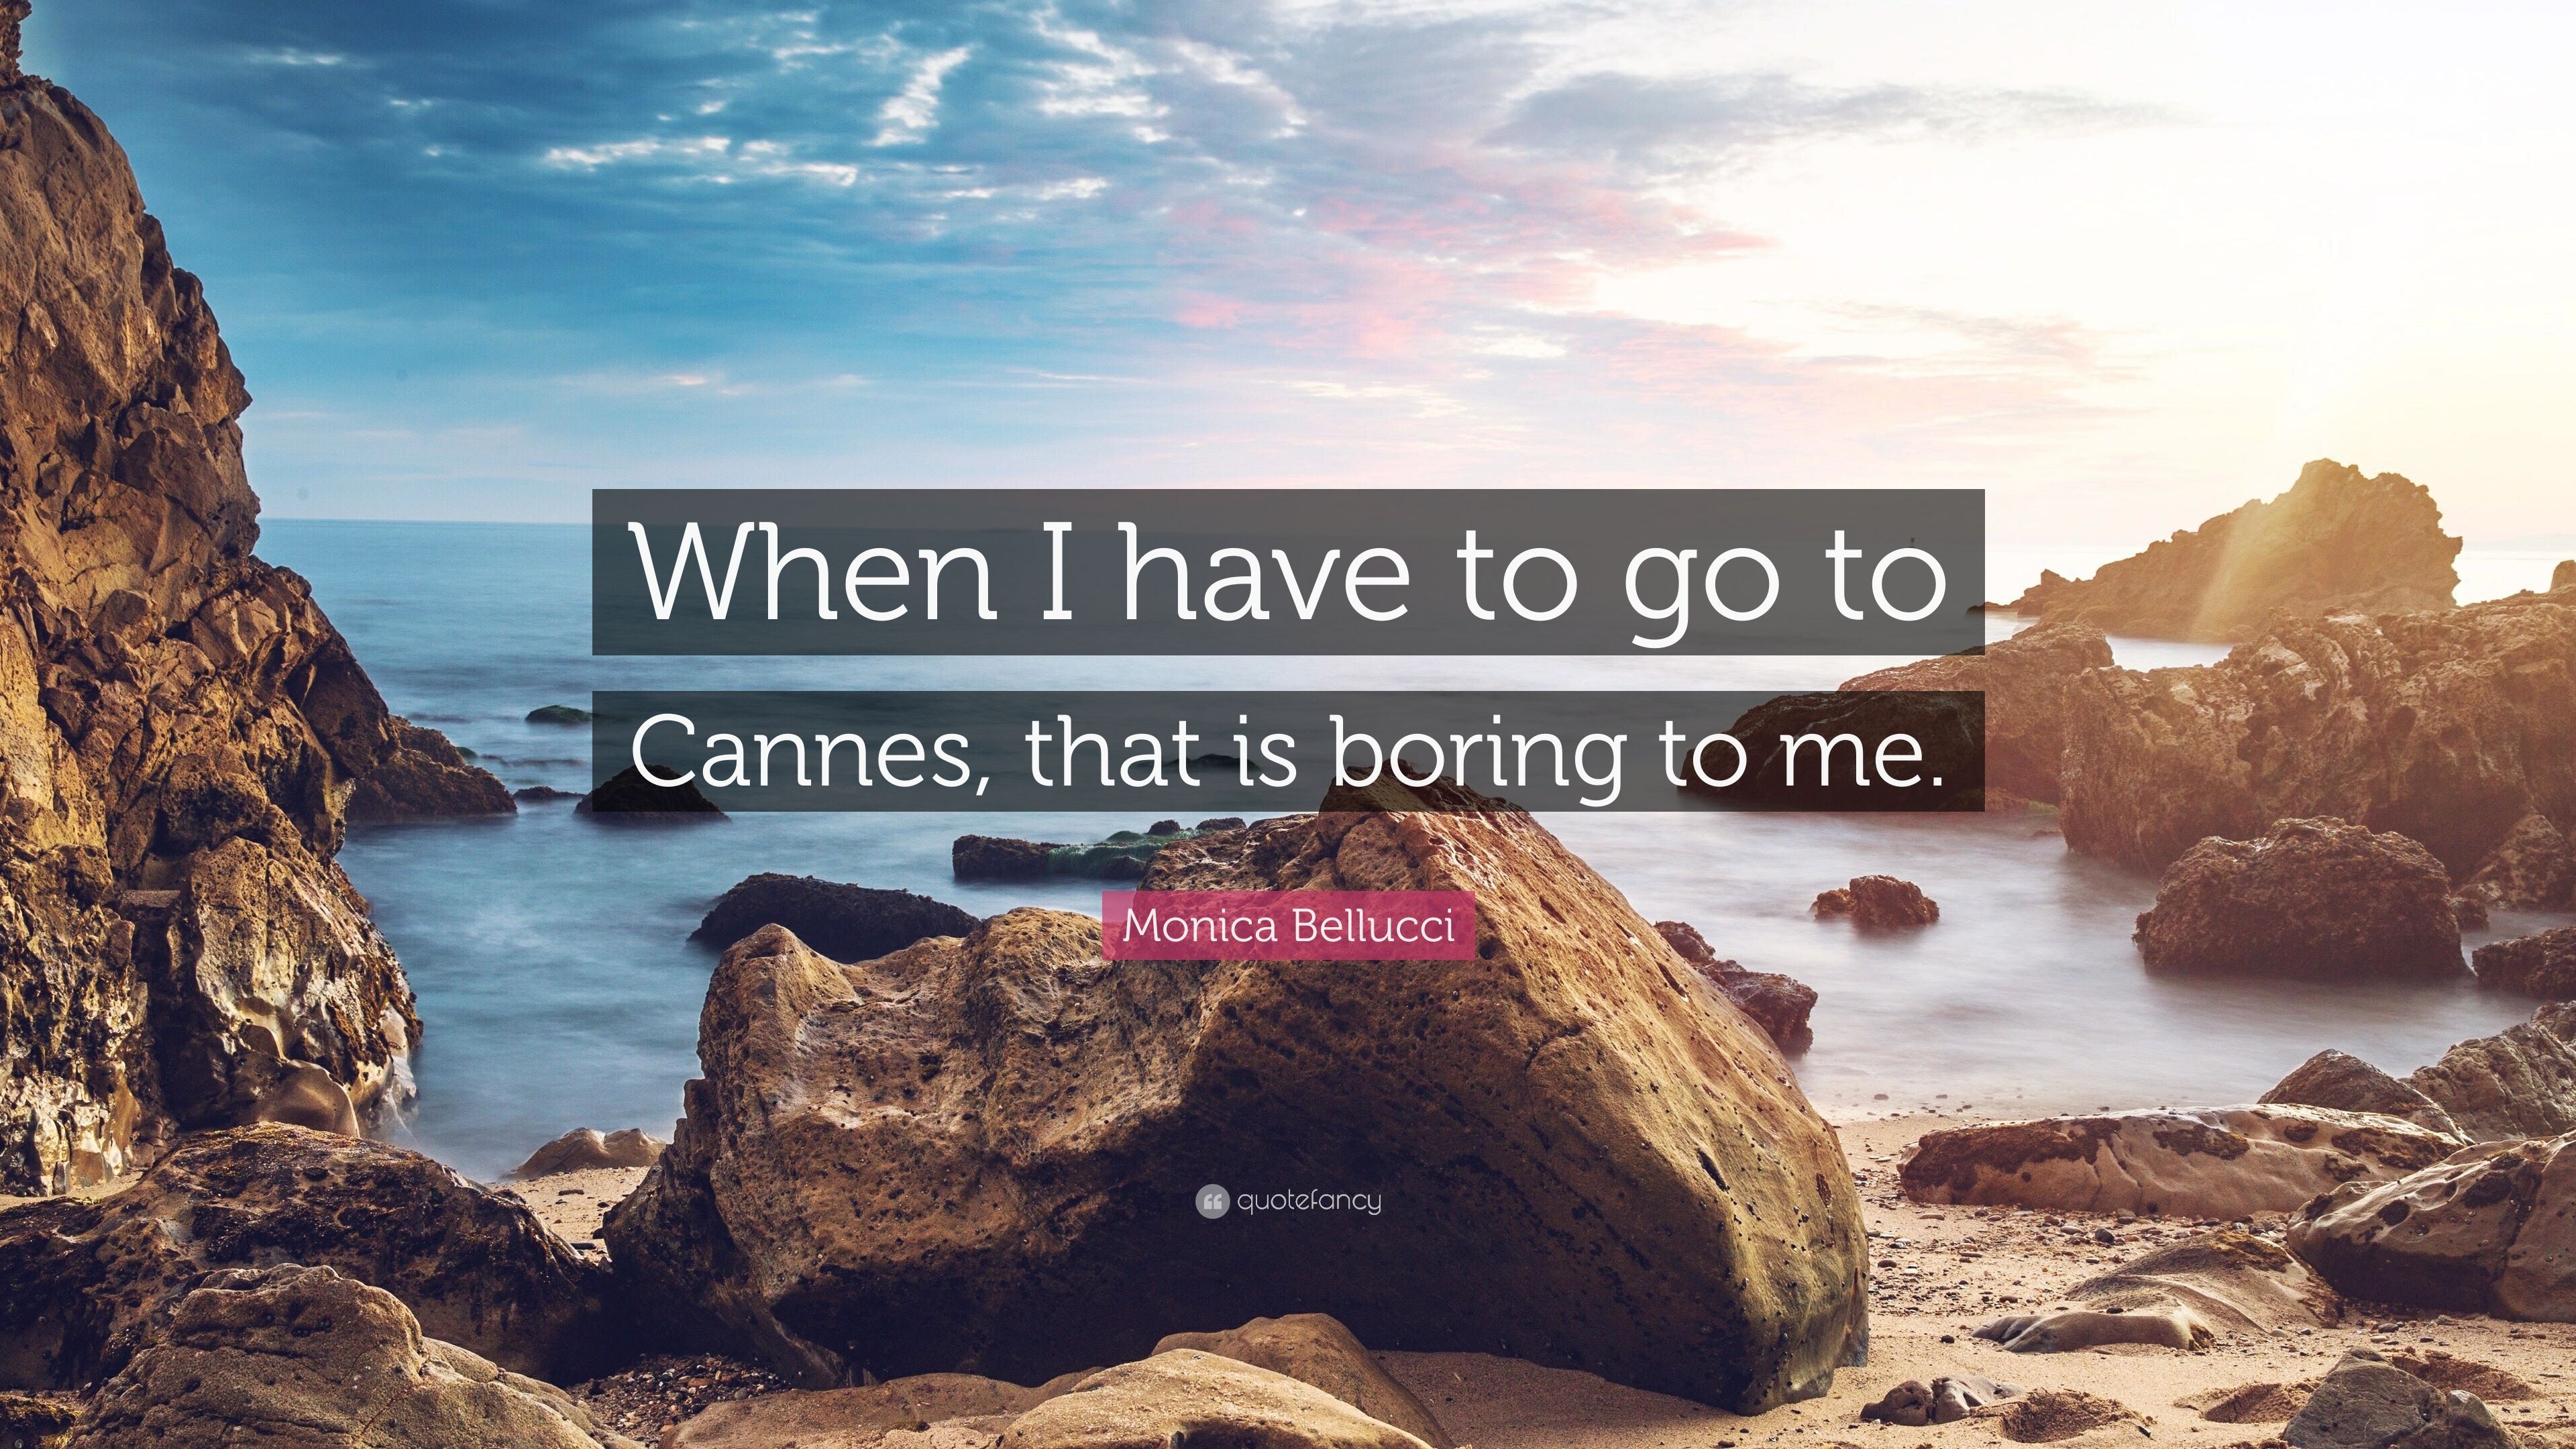 Monica Bellucci Quote: “When I have to go to Cannes, that is boring